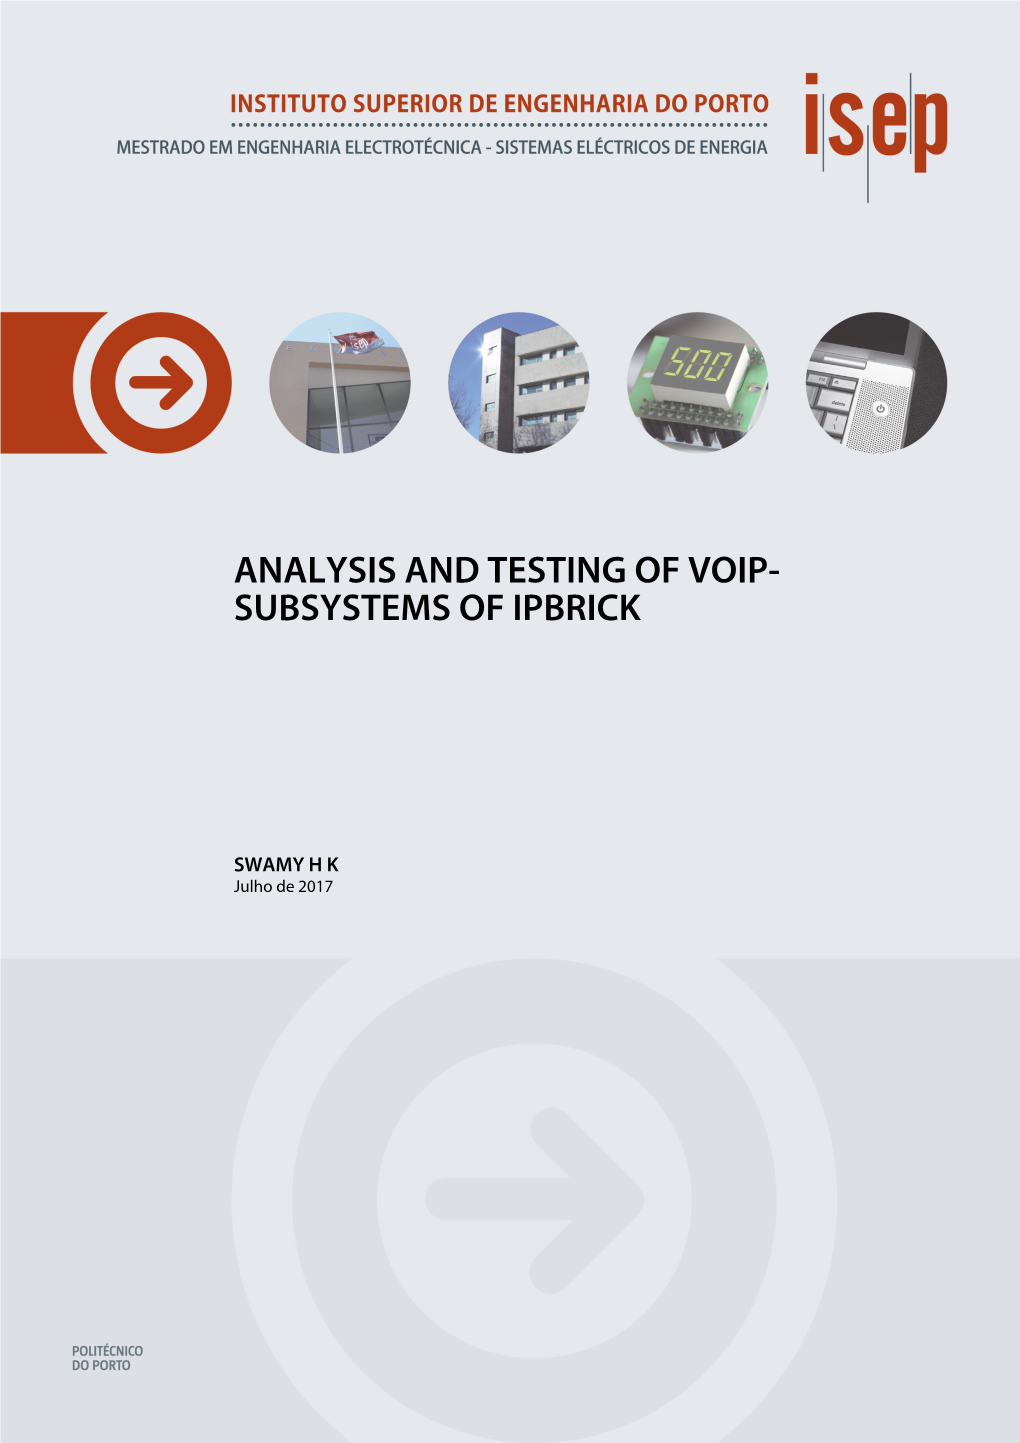 Analysis and Testing of Voip- Subsystems of Ipbrick